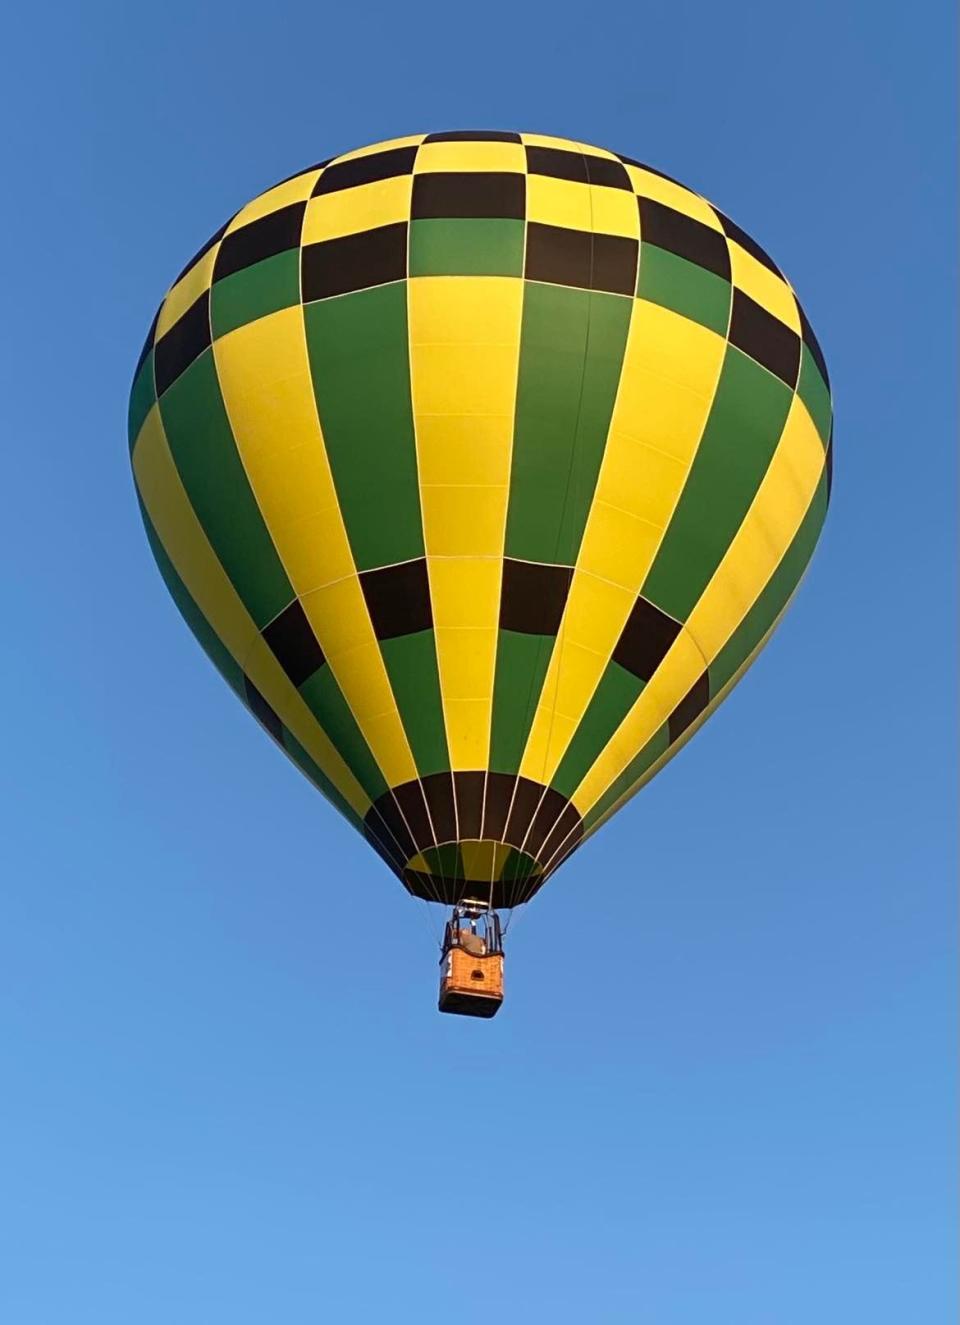 The Balloon Classic during the Pro Football Hall of Fame Enshrinement Festival is expected to attract tens of thousands of spectators. The event will be from 4 to 10 p.m. on Friday and Saturday.